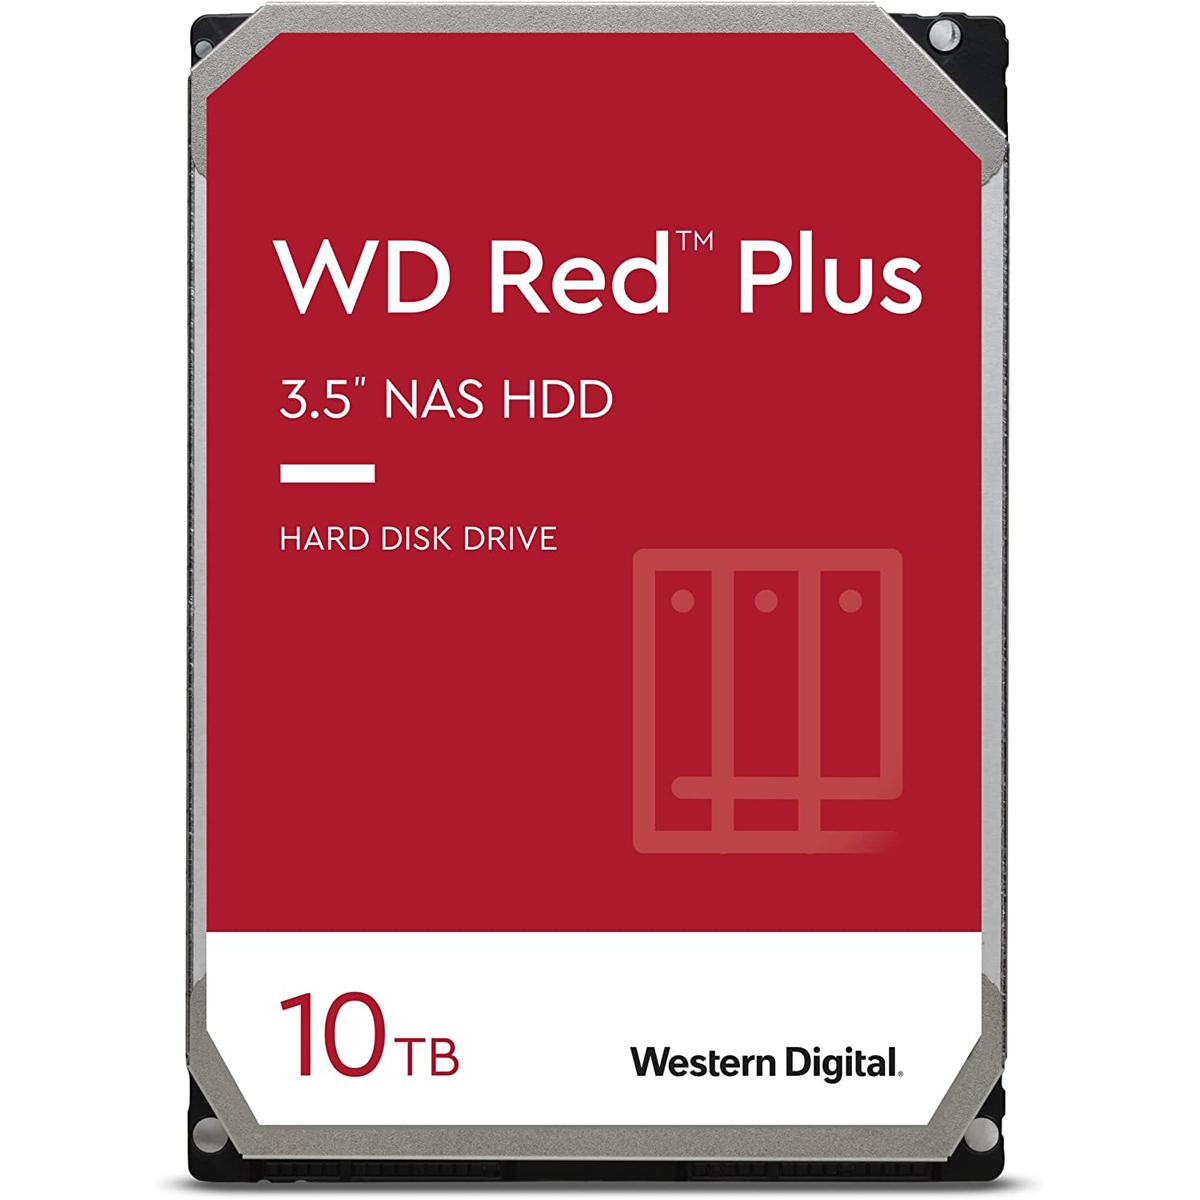 10TB WD Red Plus NAS CMR Internal Hard Drive for $159.99 Shipped